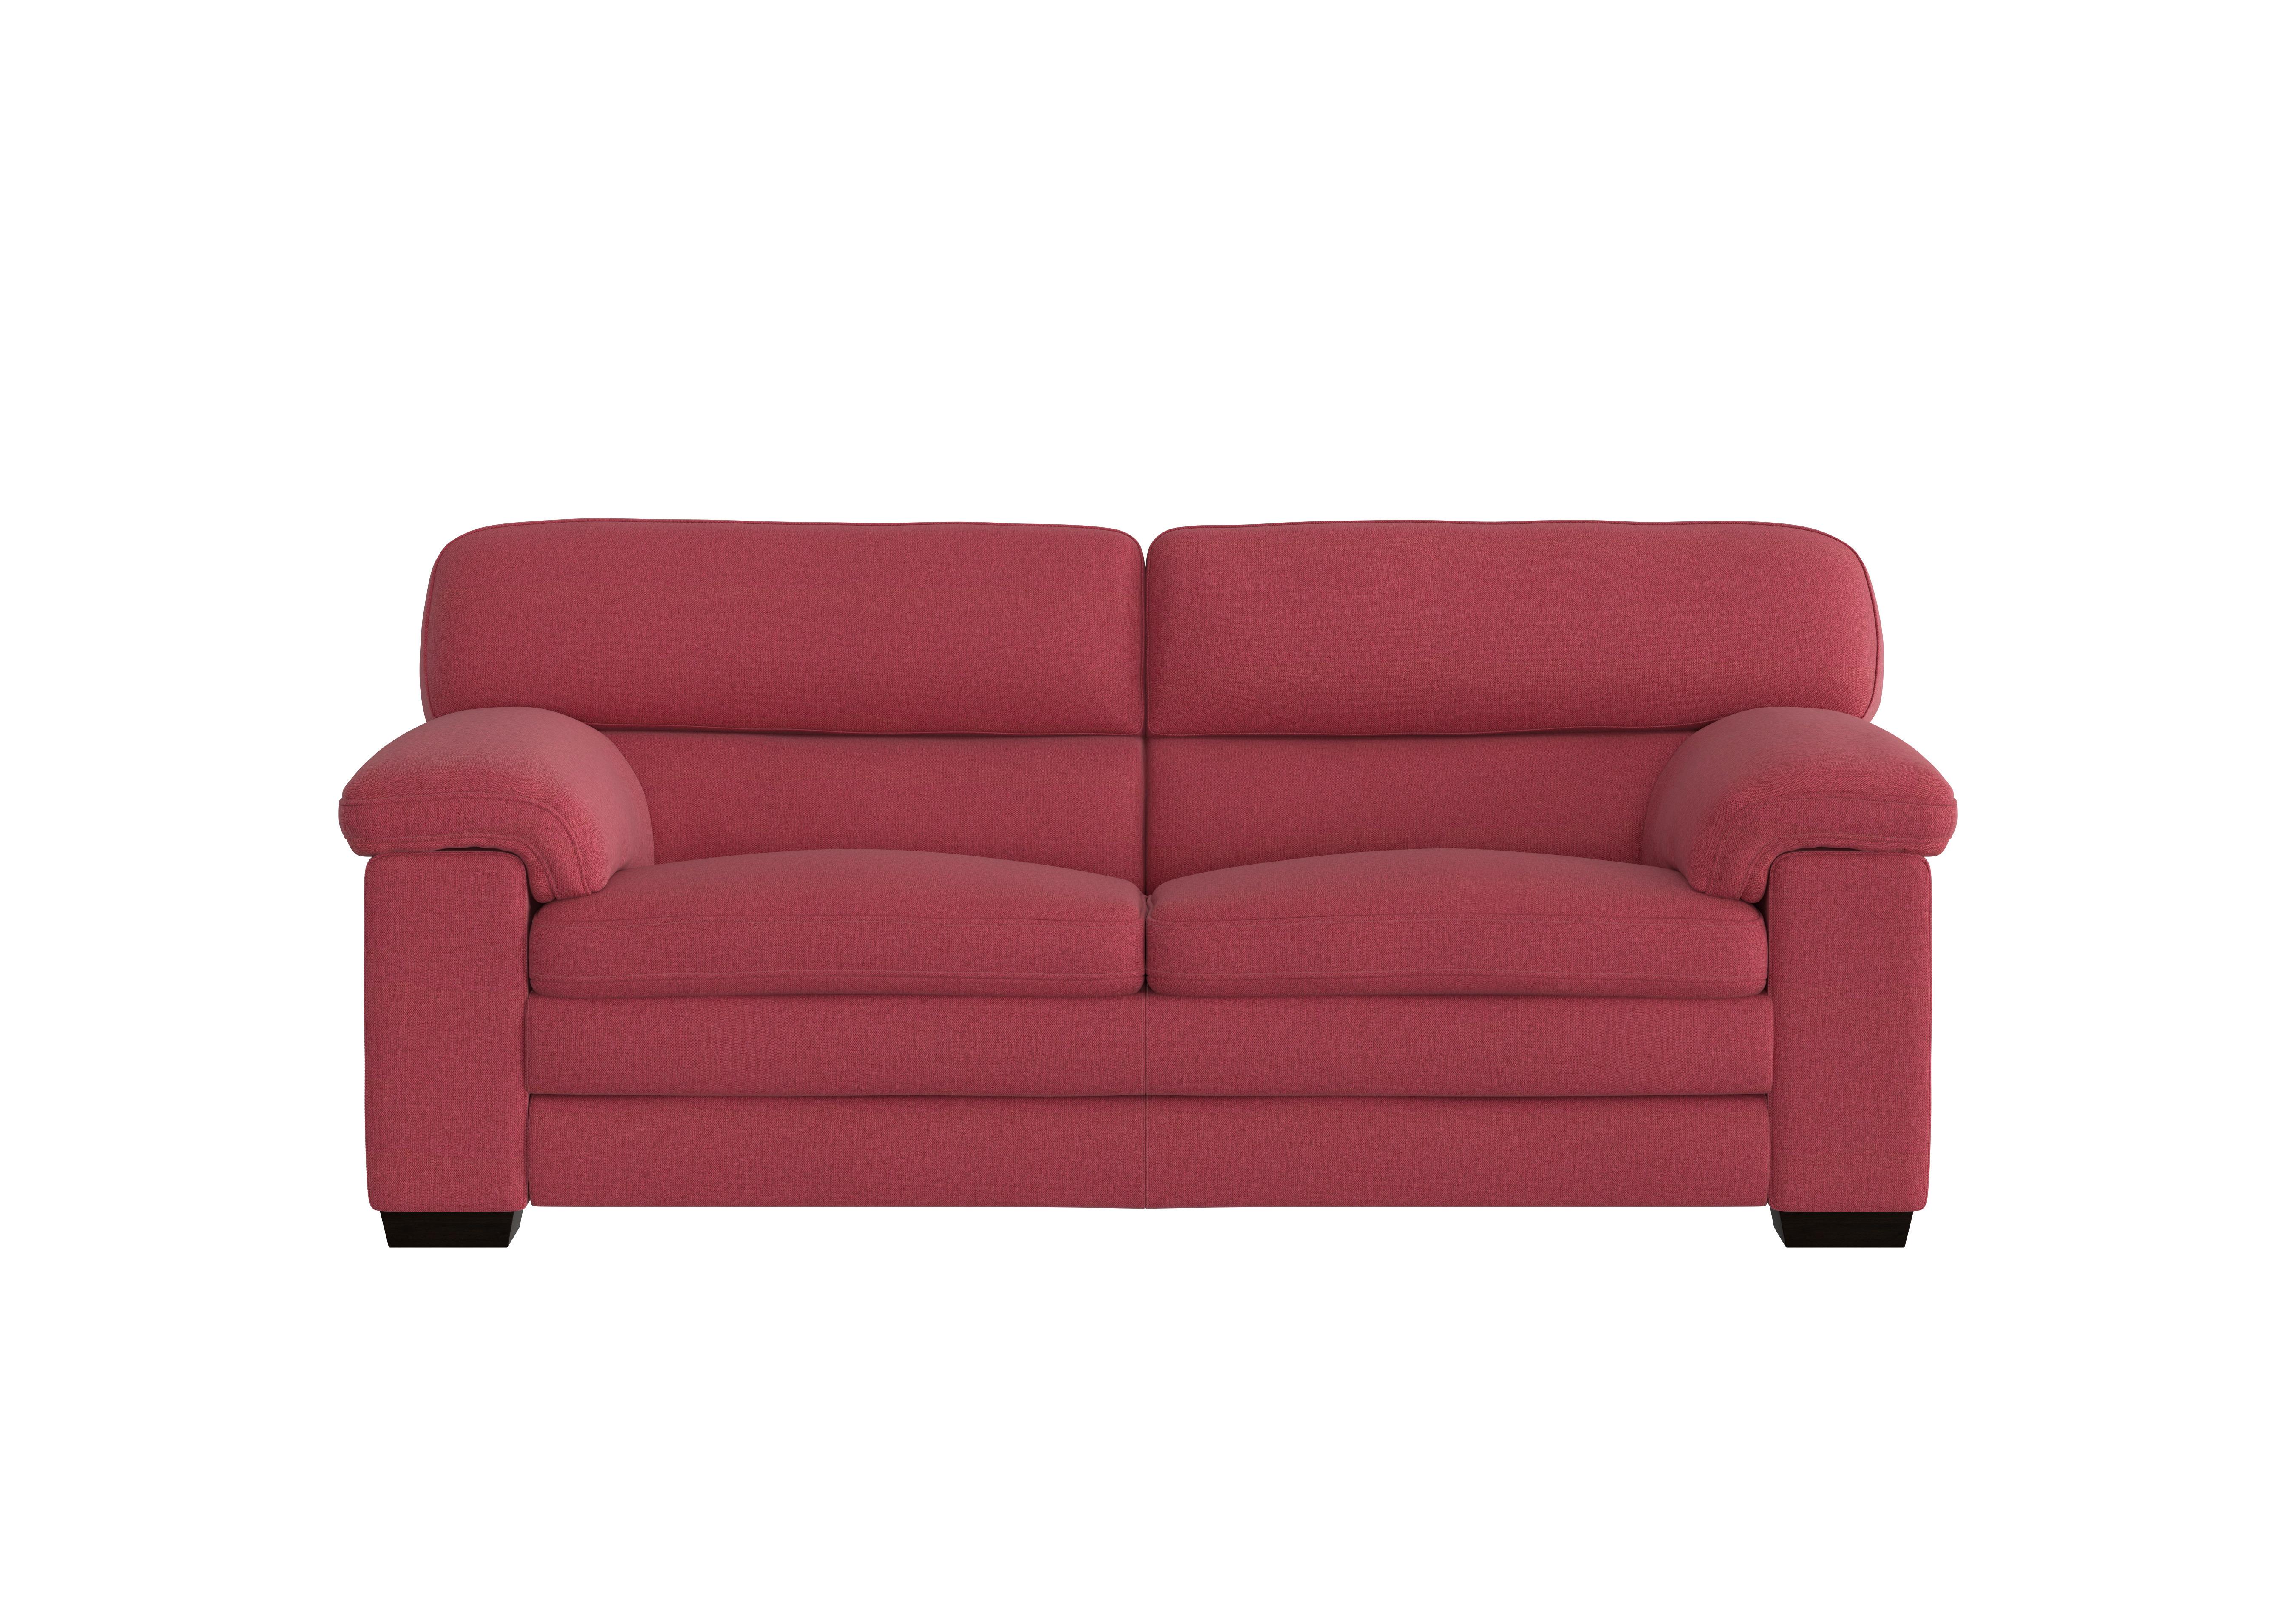 Cozee Fabric 2.5 Seater Sofa in Fab-Blt-R29 Red on Furniture Village